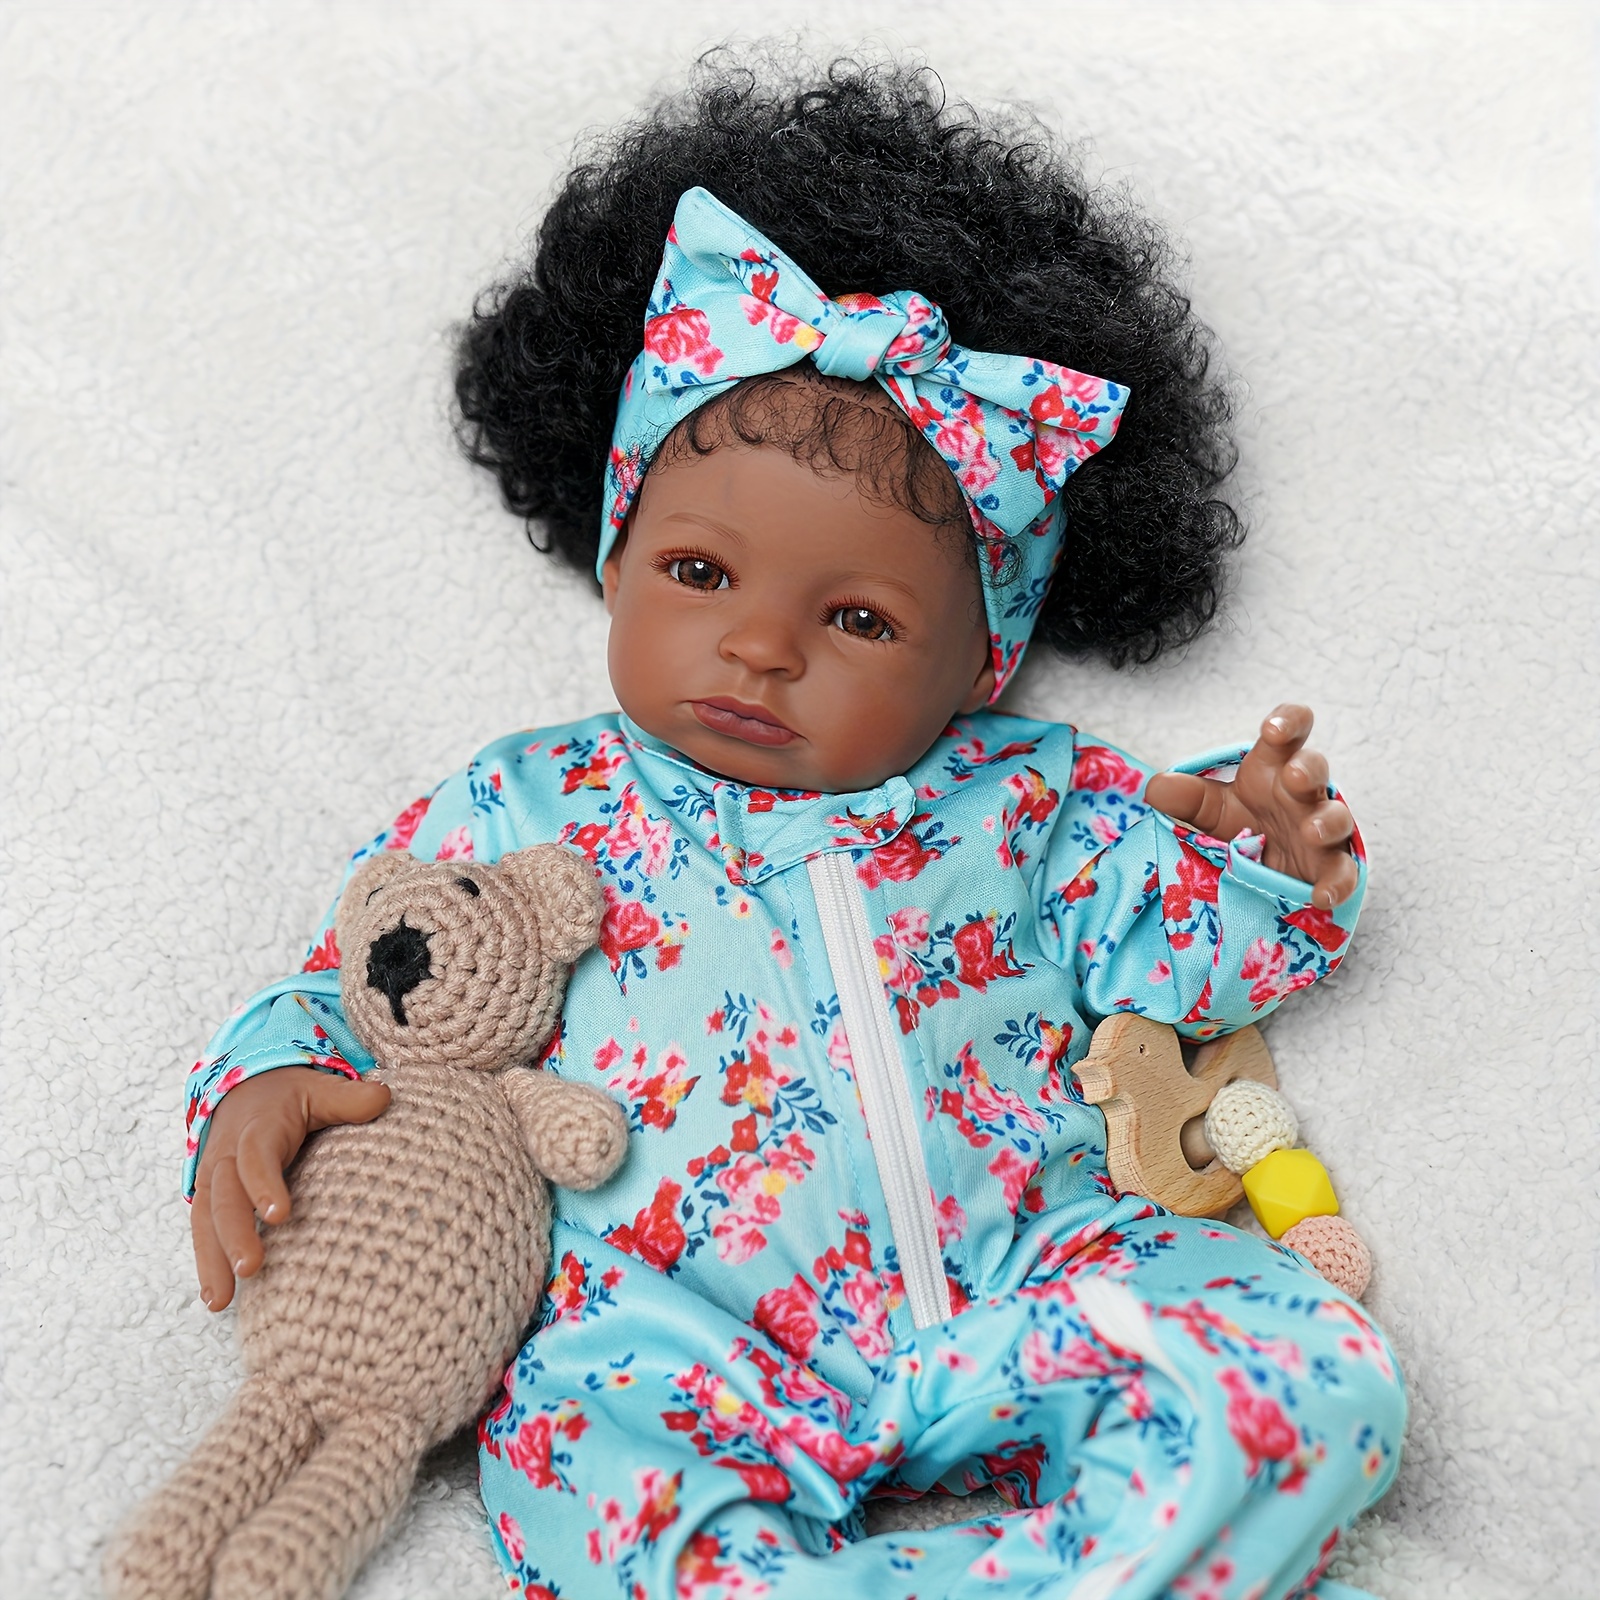 12 Realistic Soft Body African American Baby Doll with Open Eyes